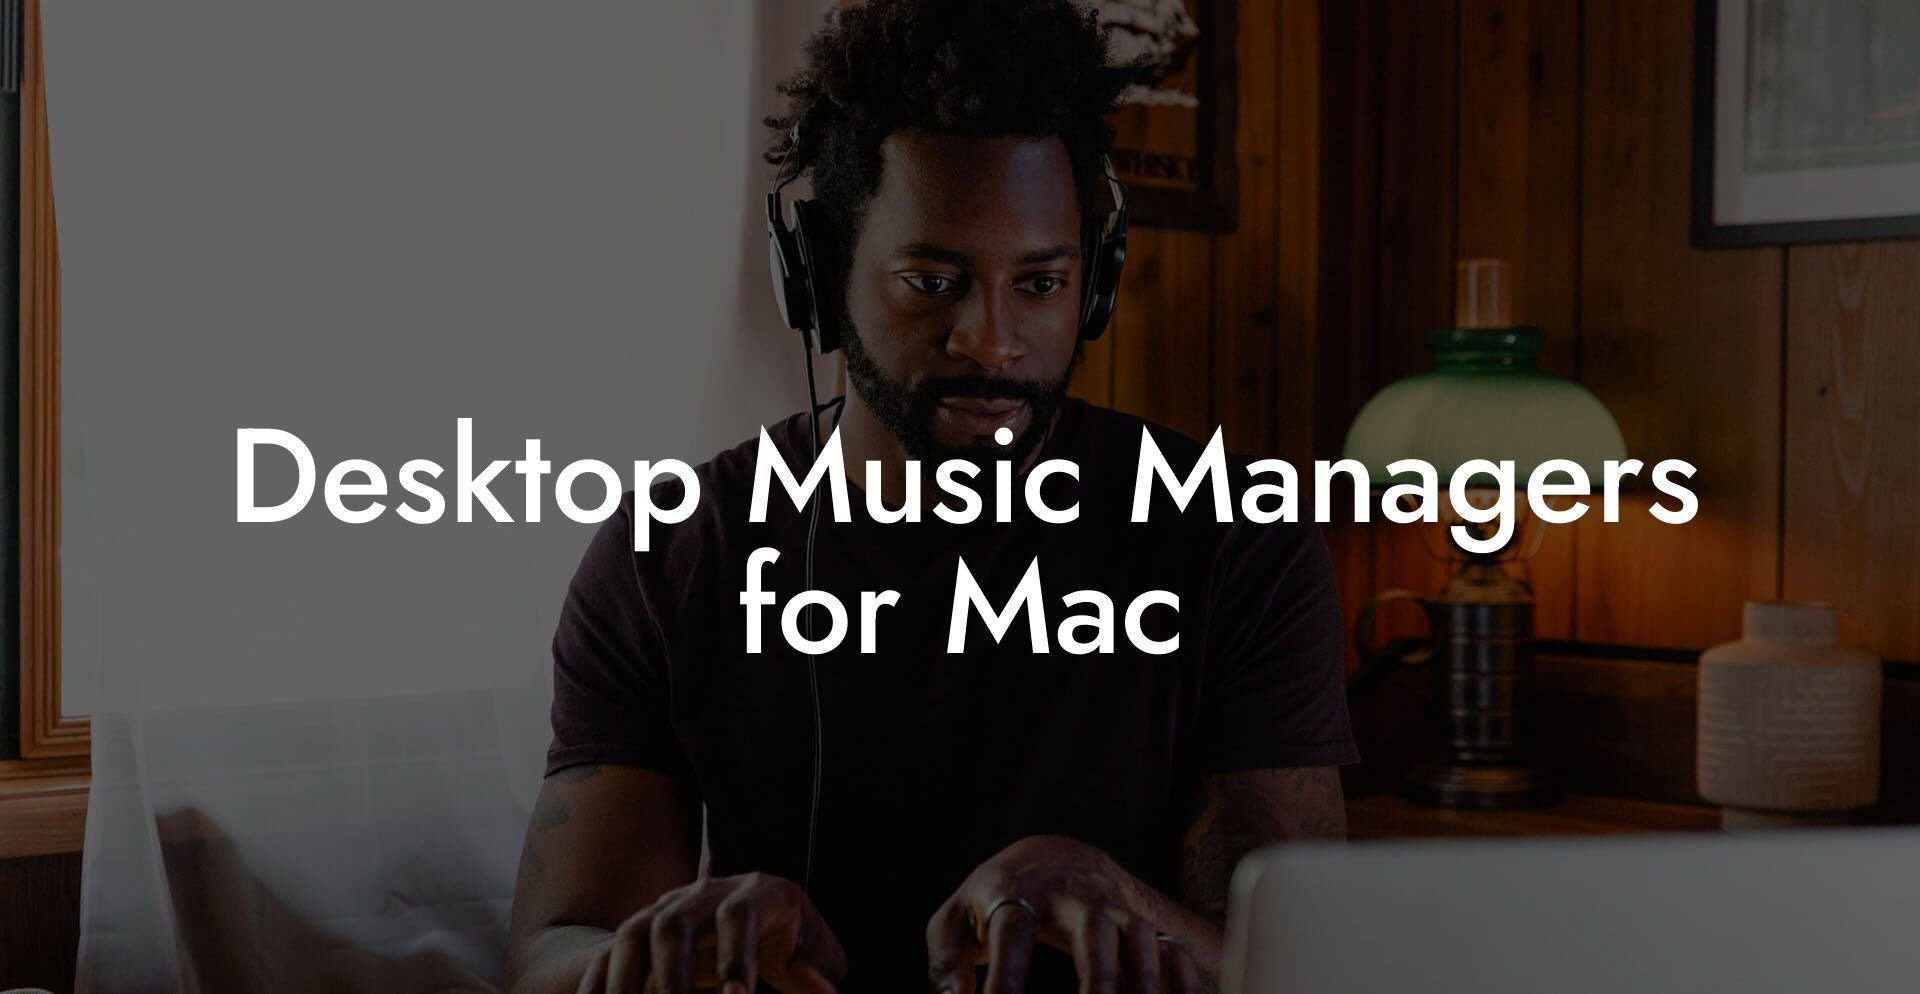 Desktop Music Managers for Mac